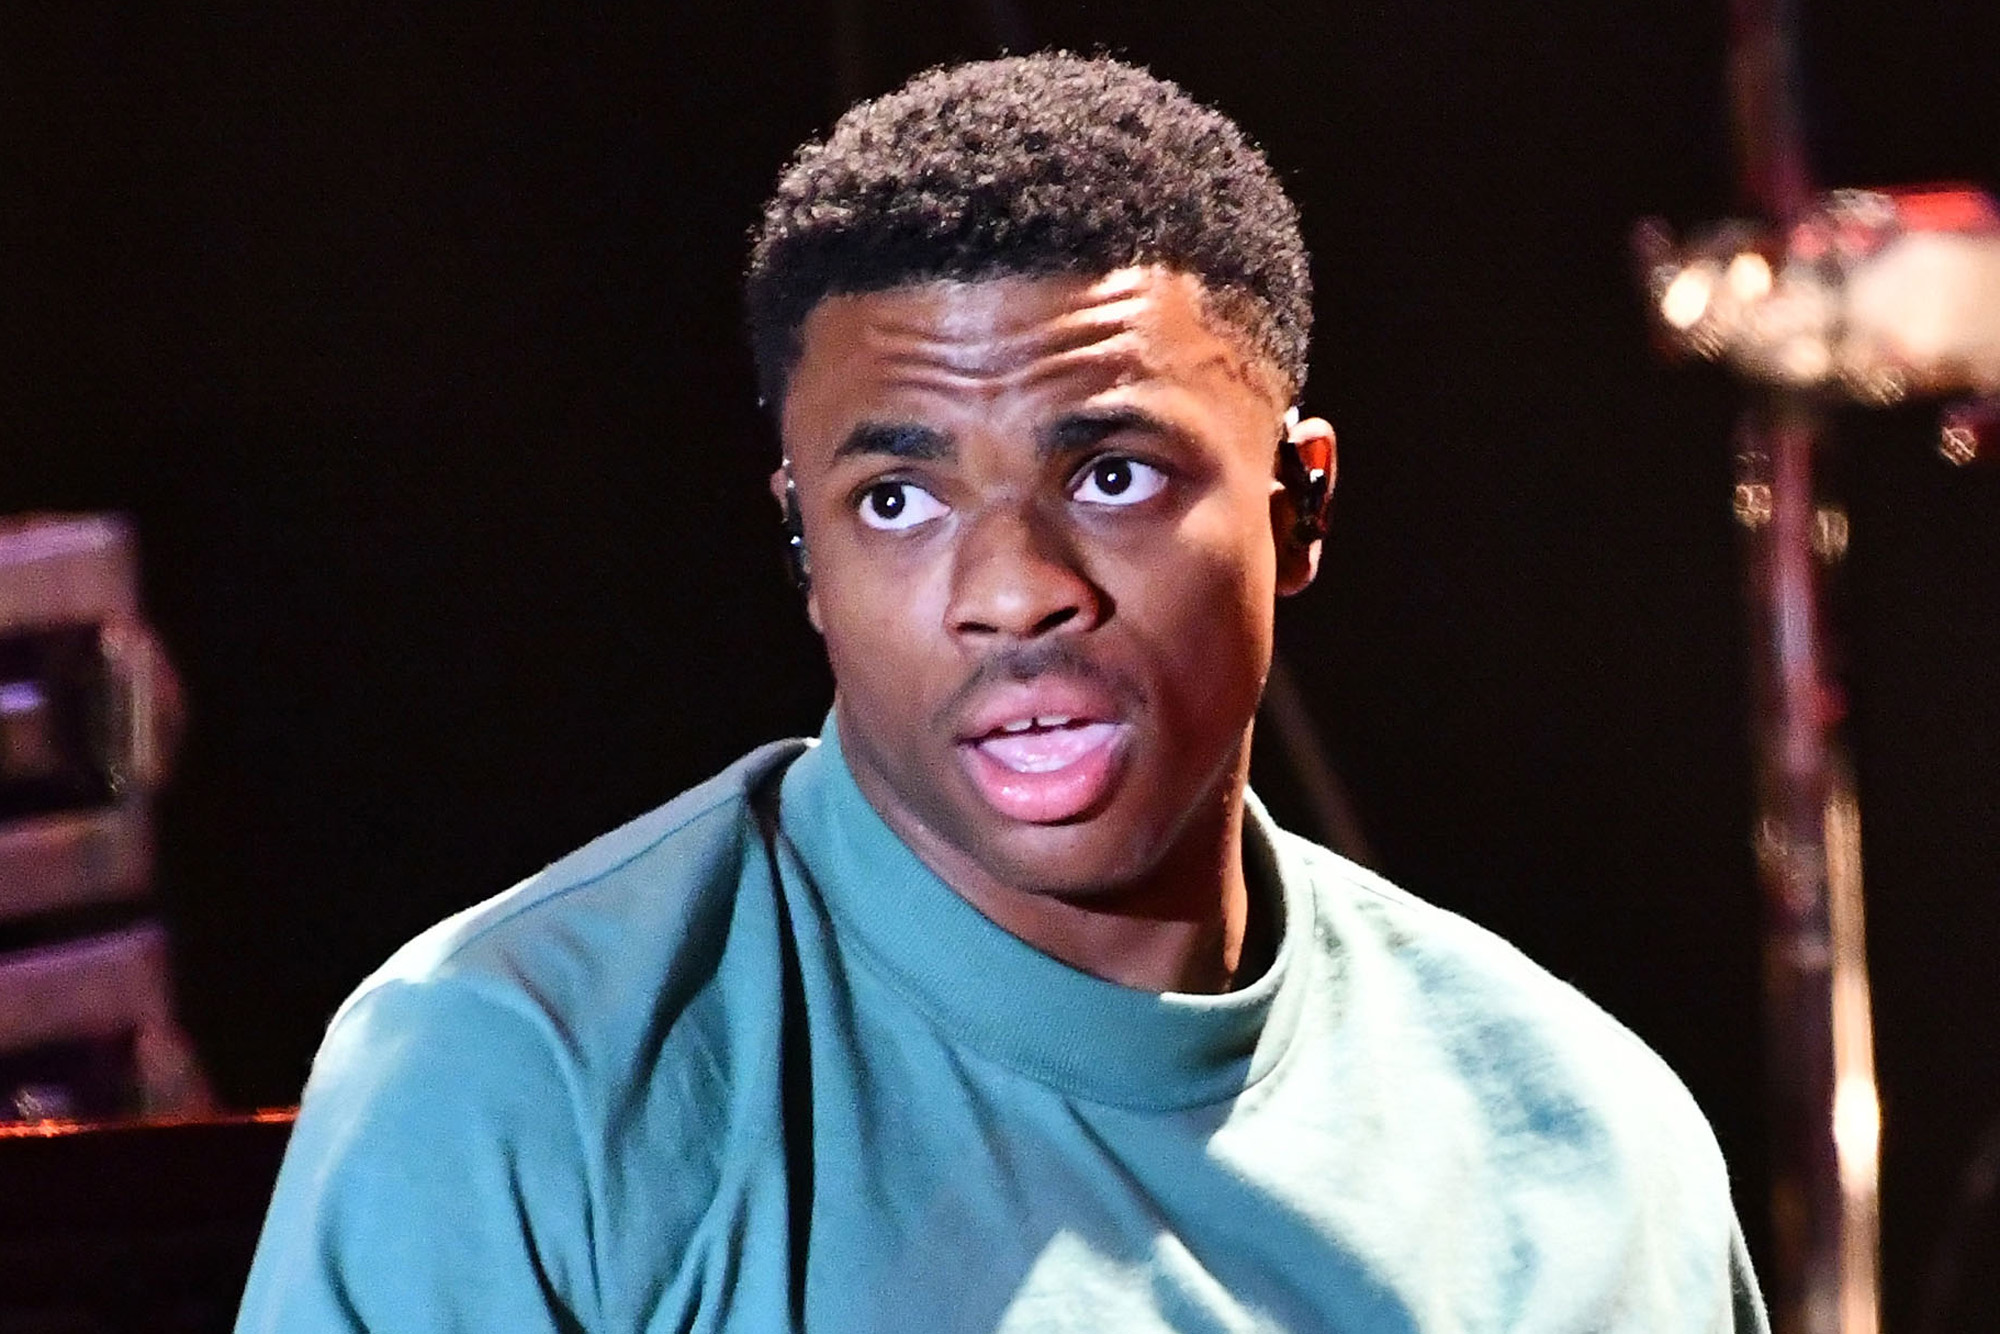 Vince Staples explains his continued sobriety